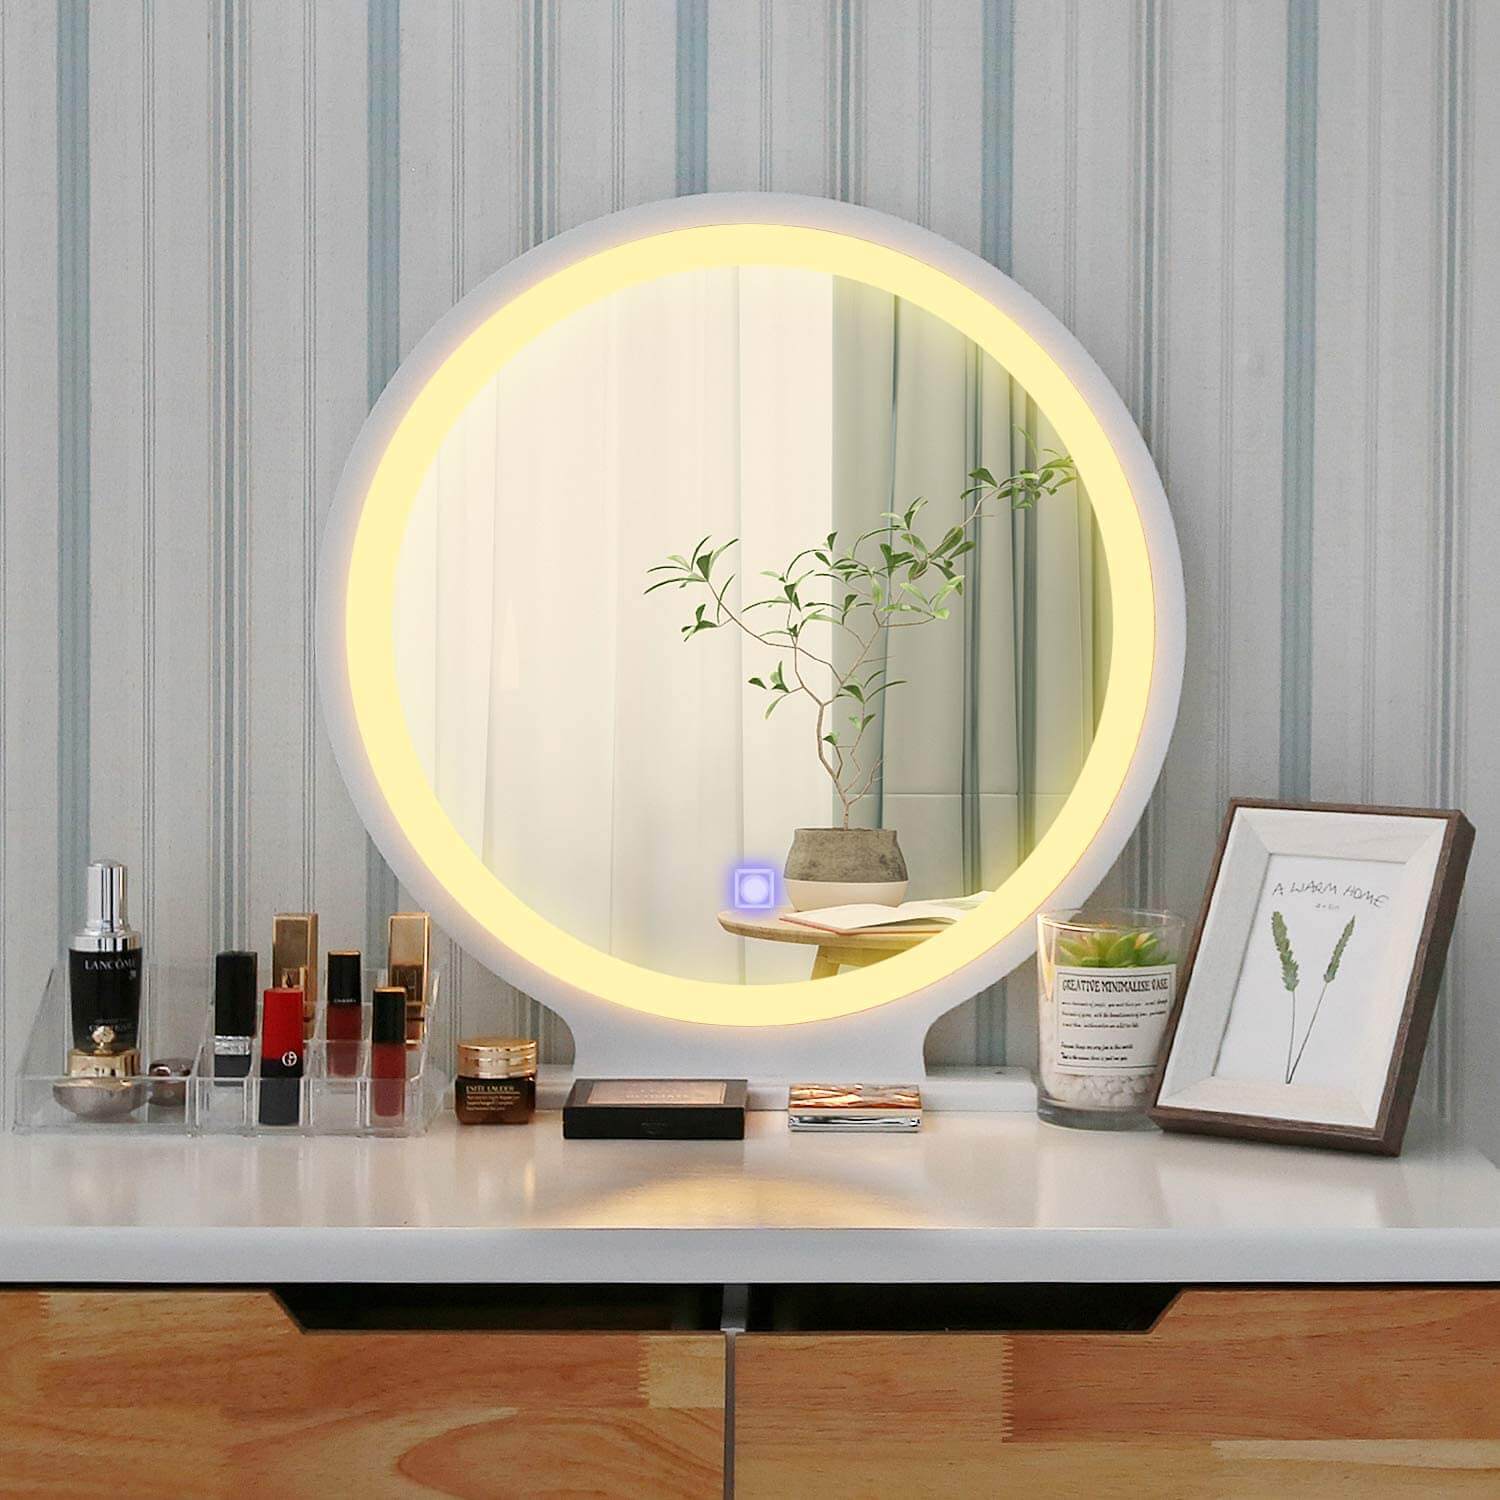 One light mode of Elecwish Makeup dressing table 3 Lighting Modes Round Mirror modes